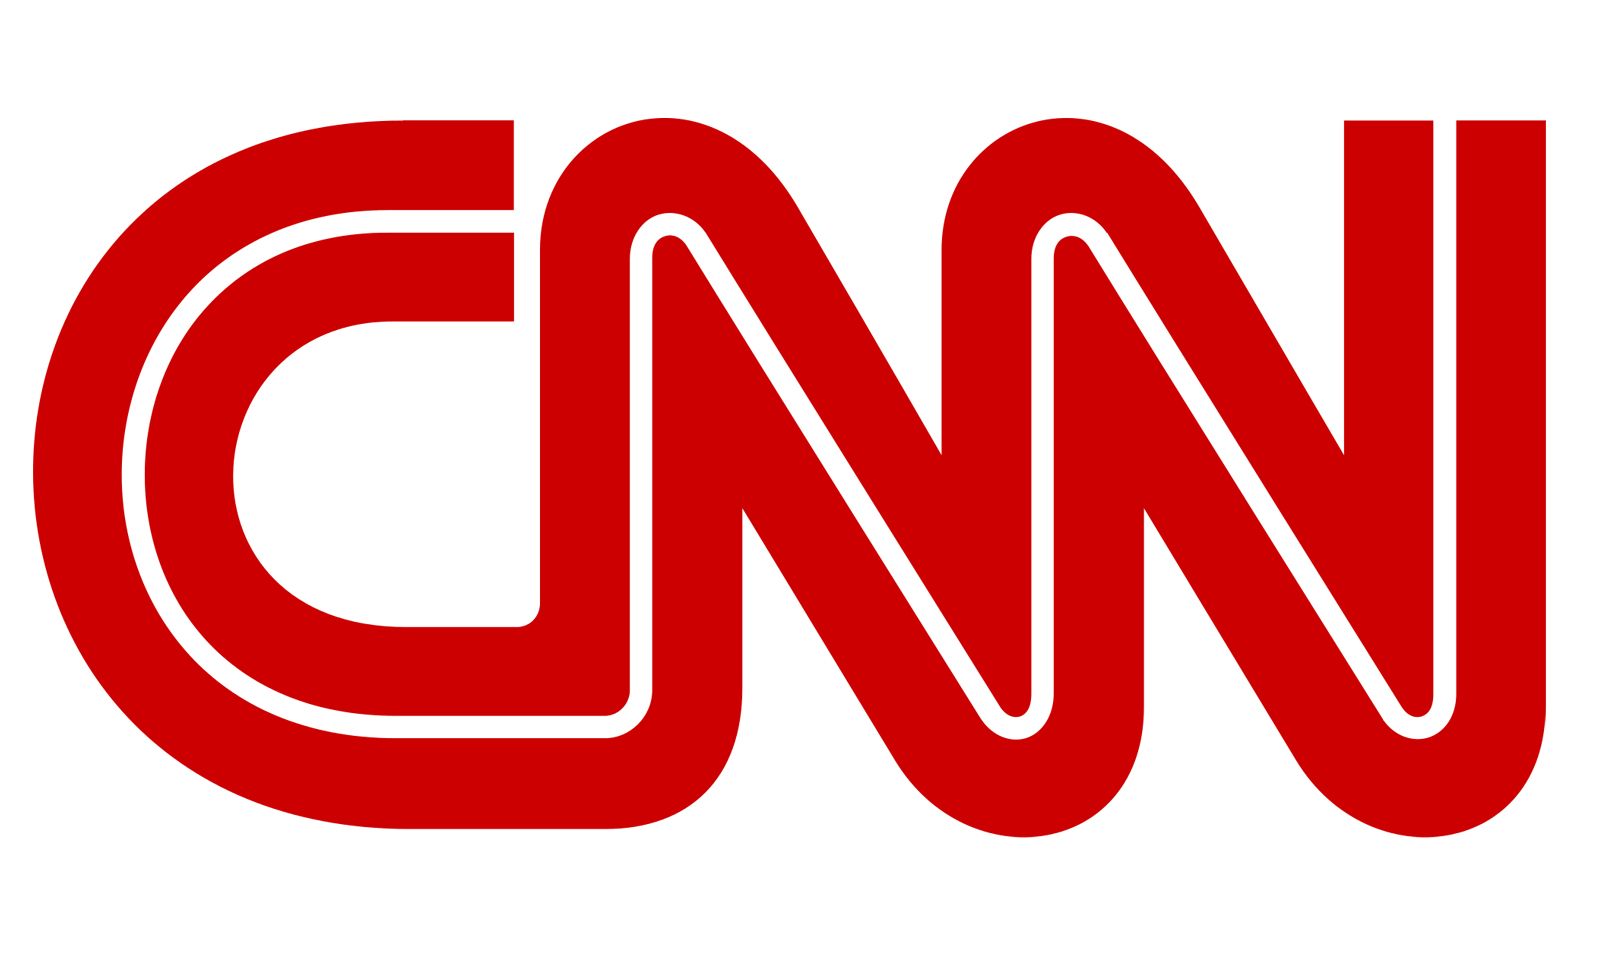 CNN Reports On Trend in 'Ethical' Porn